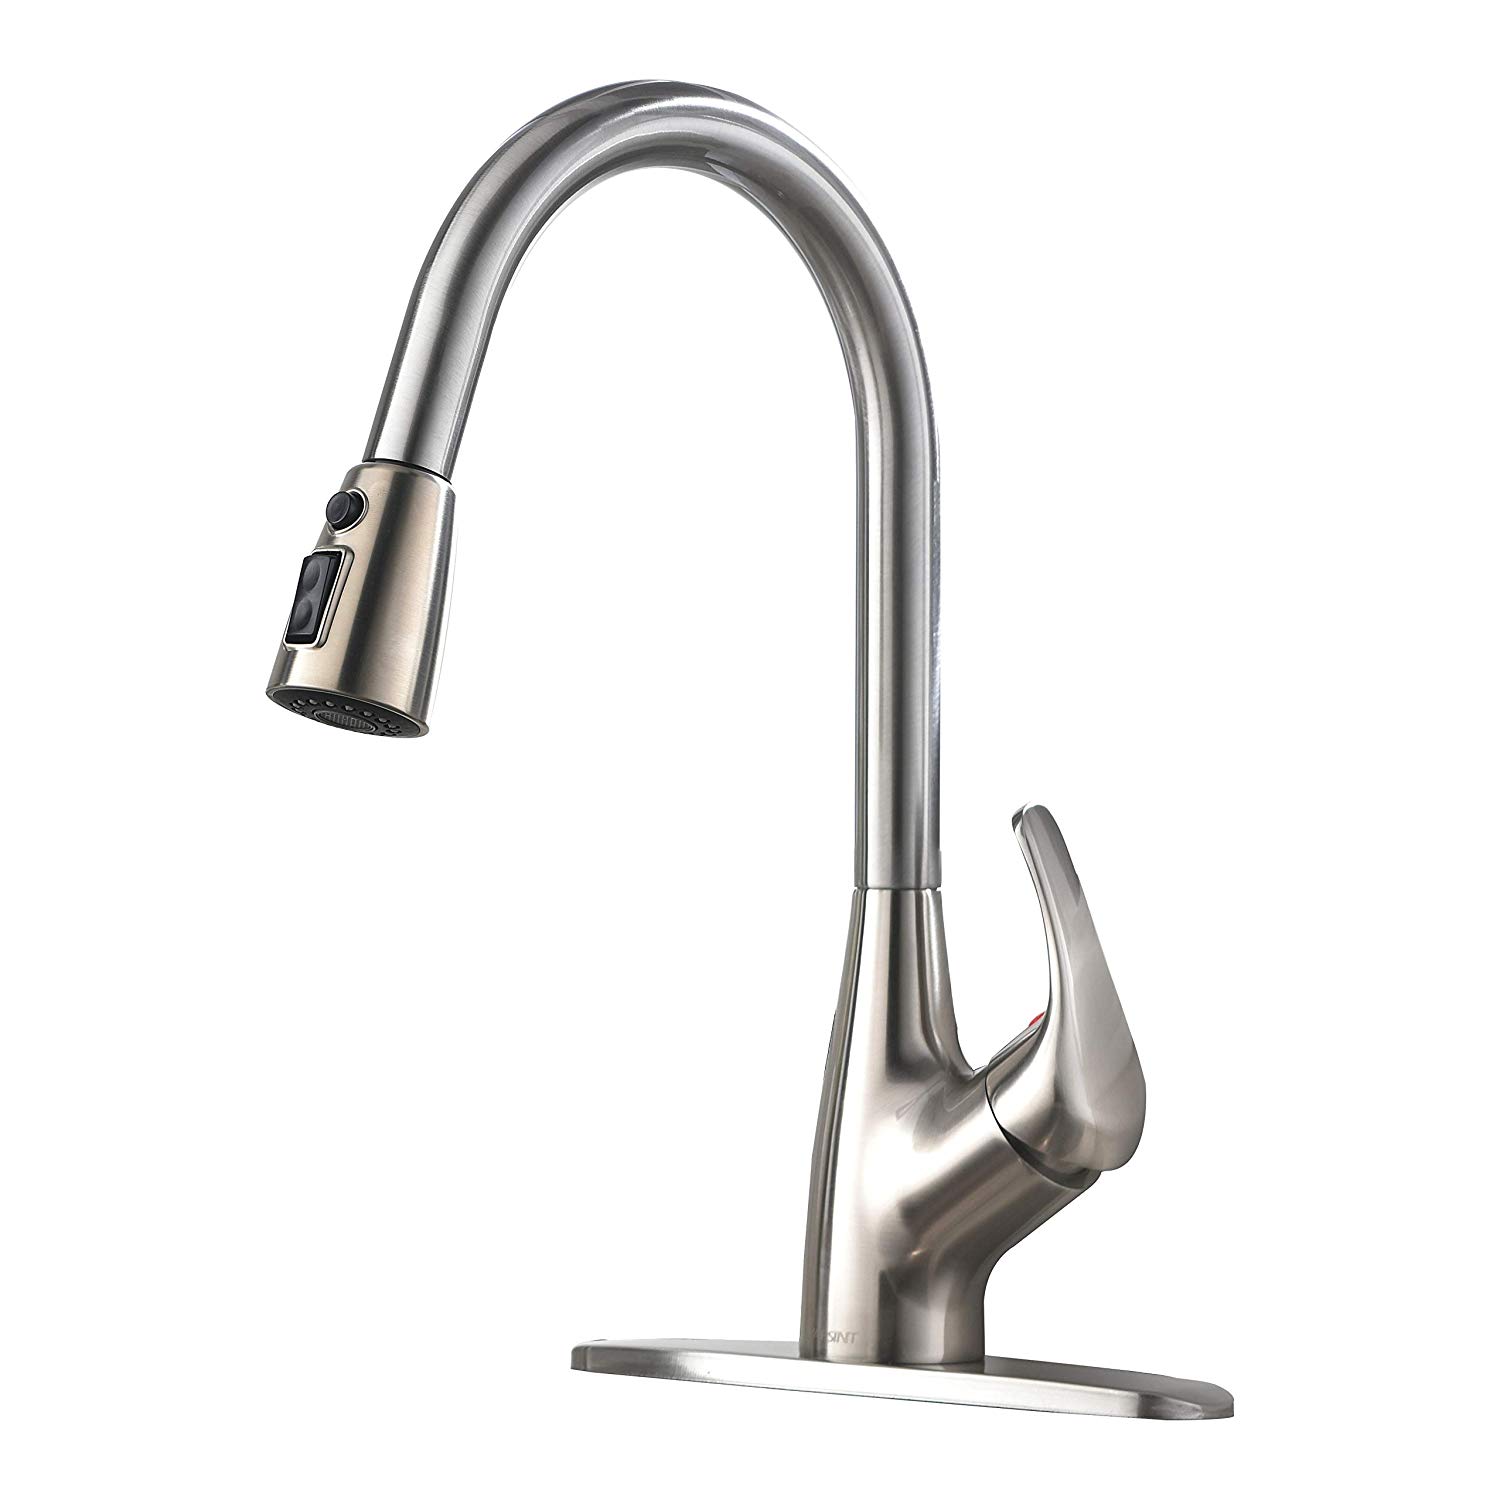 VESLA HOME Commercial Stainless Steel Single Handle Single Lever Pull-Down Pull Out Sprayer Brushed Nickel Kitchen Sink Faucet, Kitchen Faucets